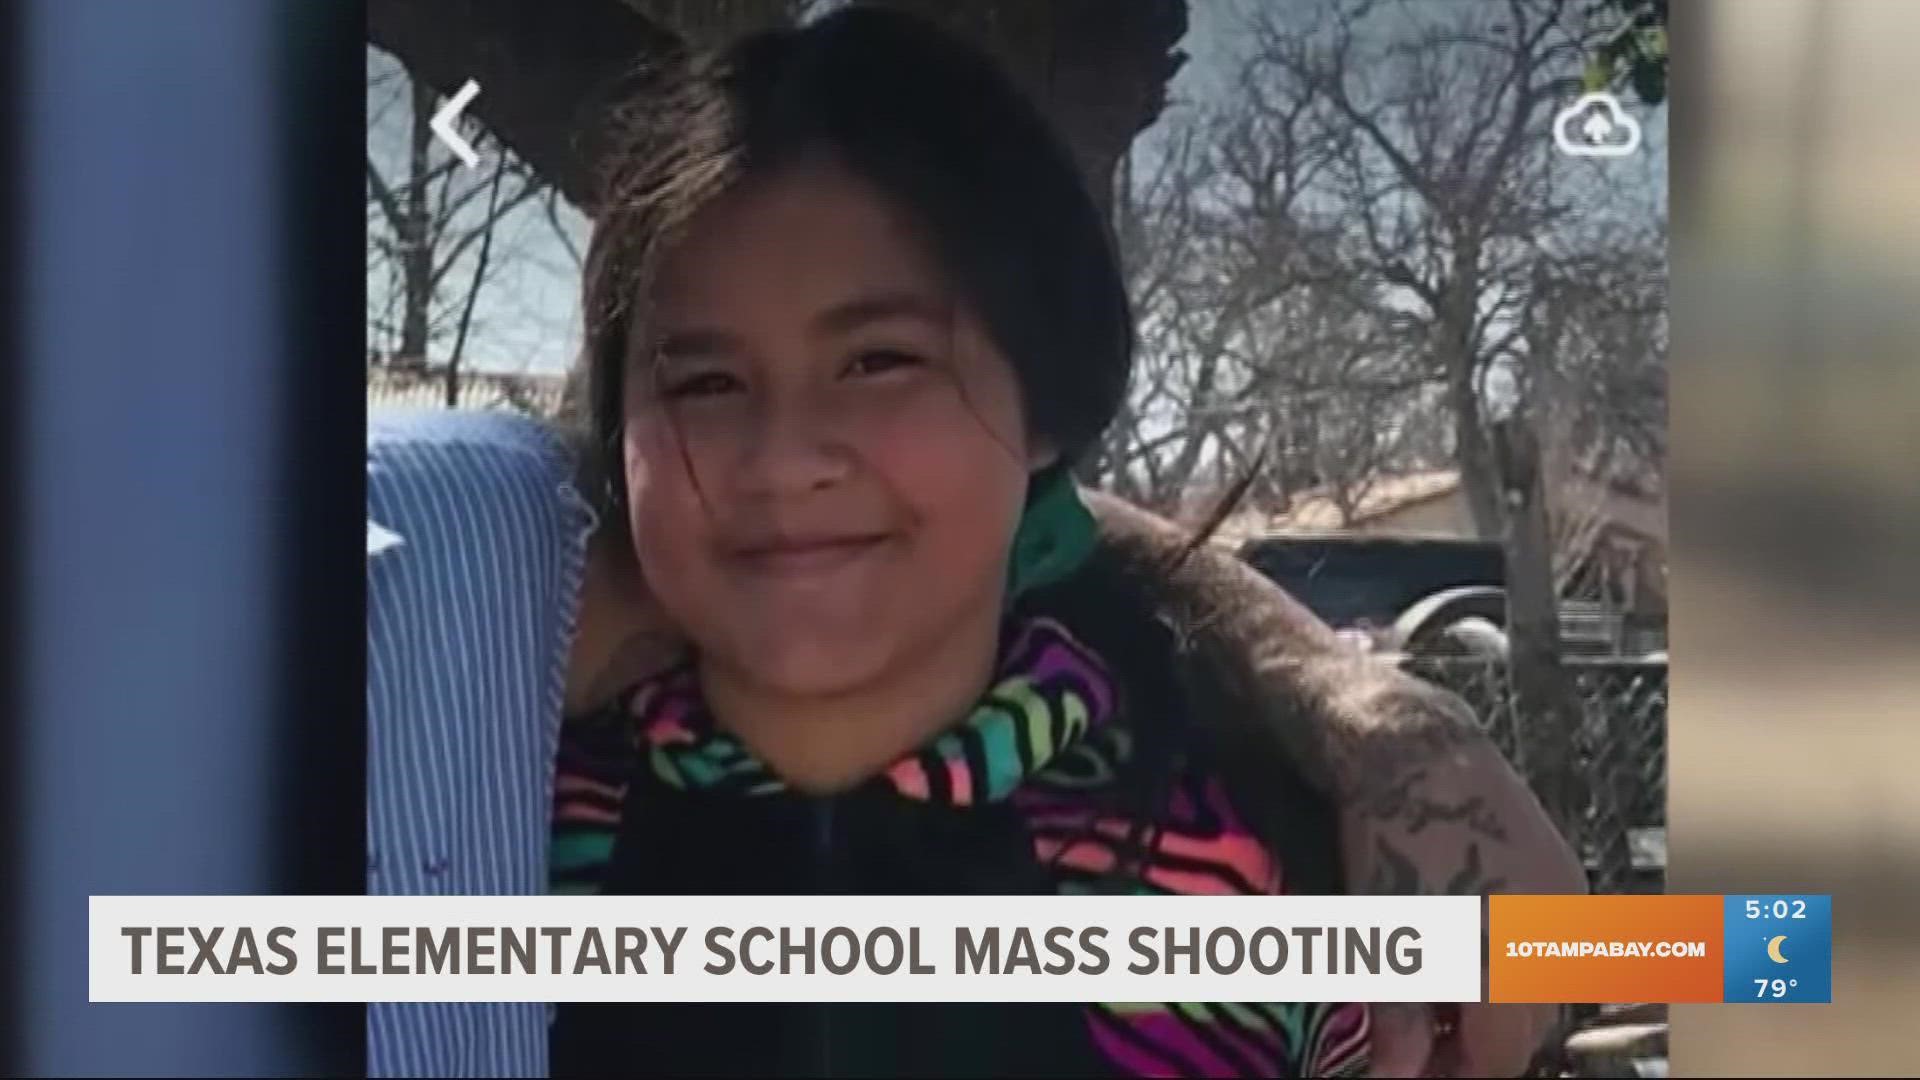 Tuesday's assault at Robb Elementary School in the heavily Latino town of Uvalde was the deadliest shooting at a U.S. school since Sandy Hook.